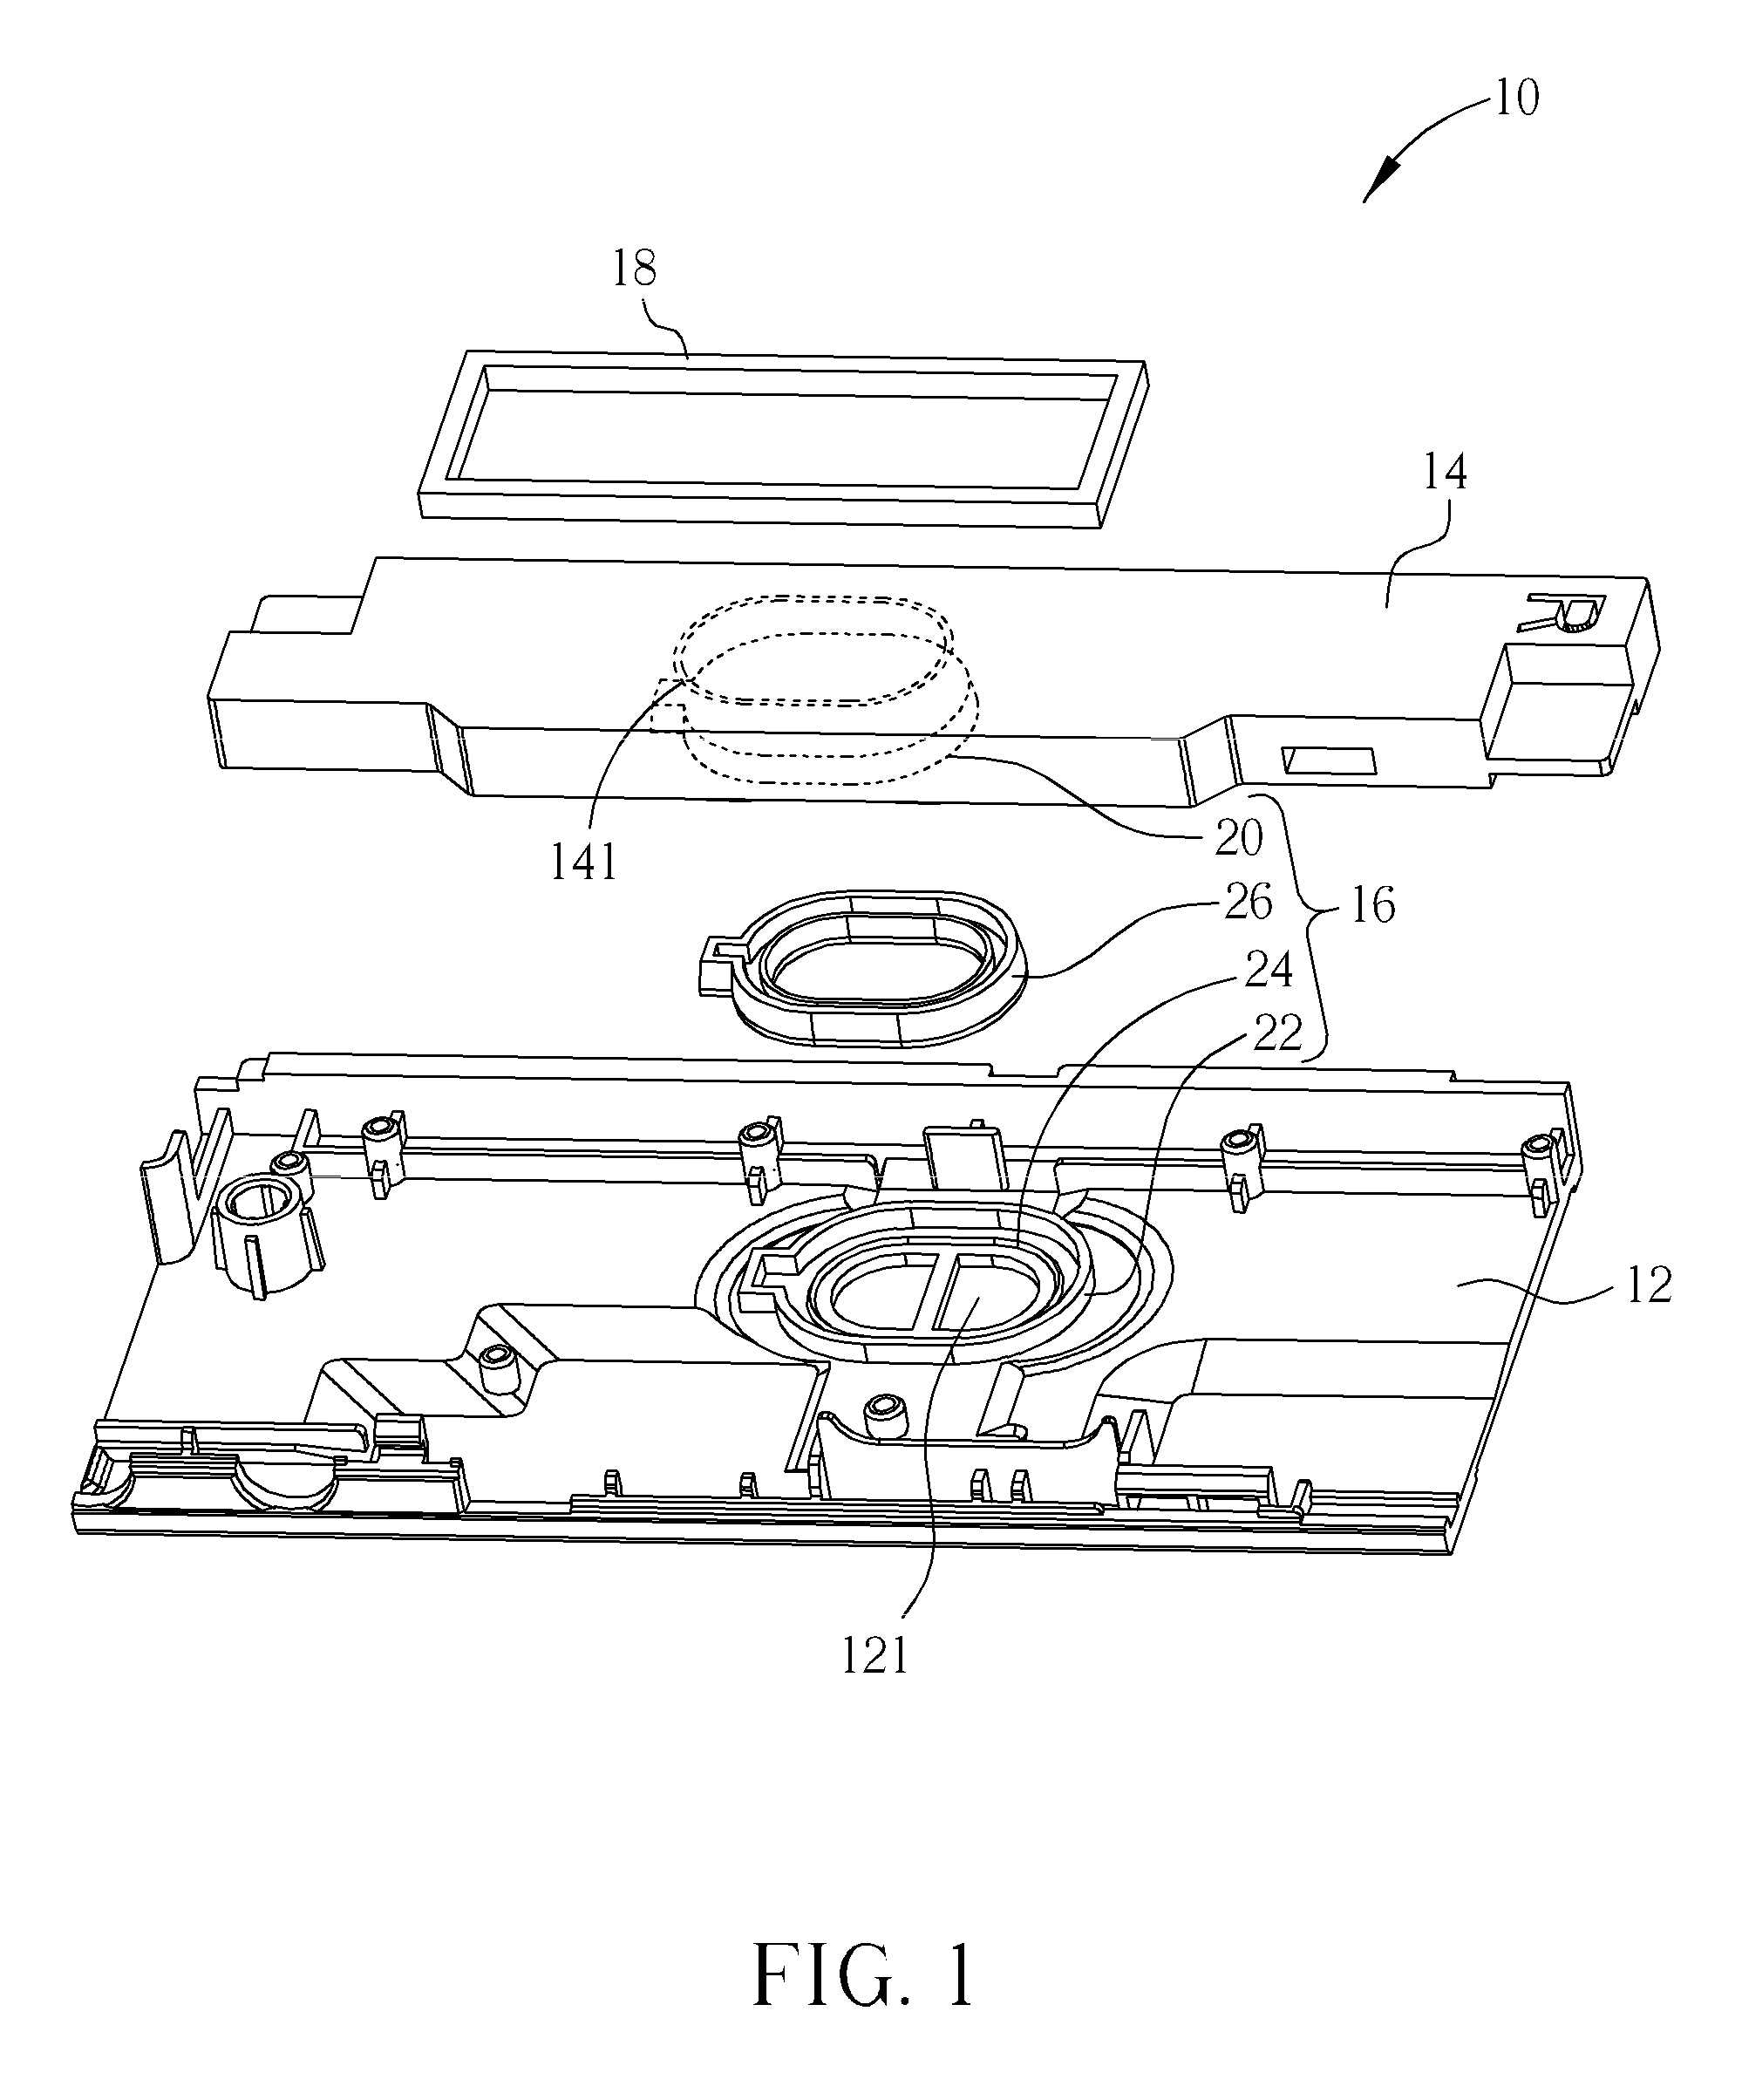 Fixing mechanism for fixing a sound box and related electronic device